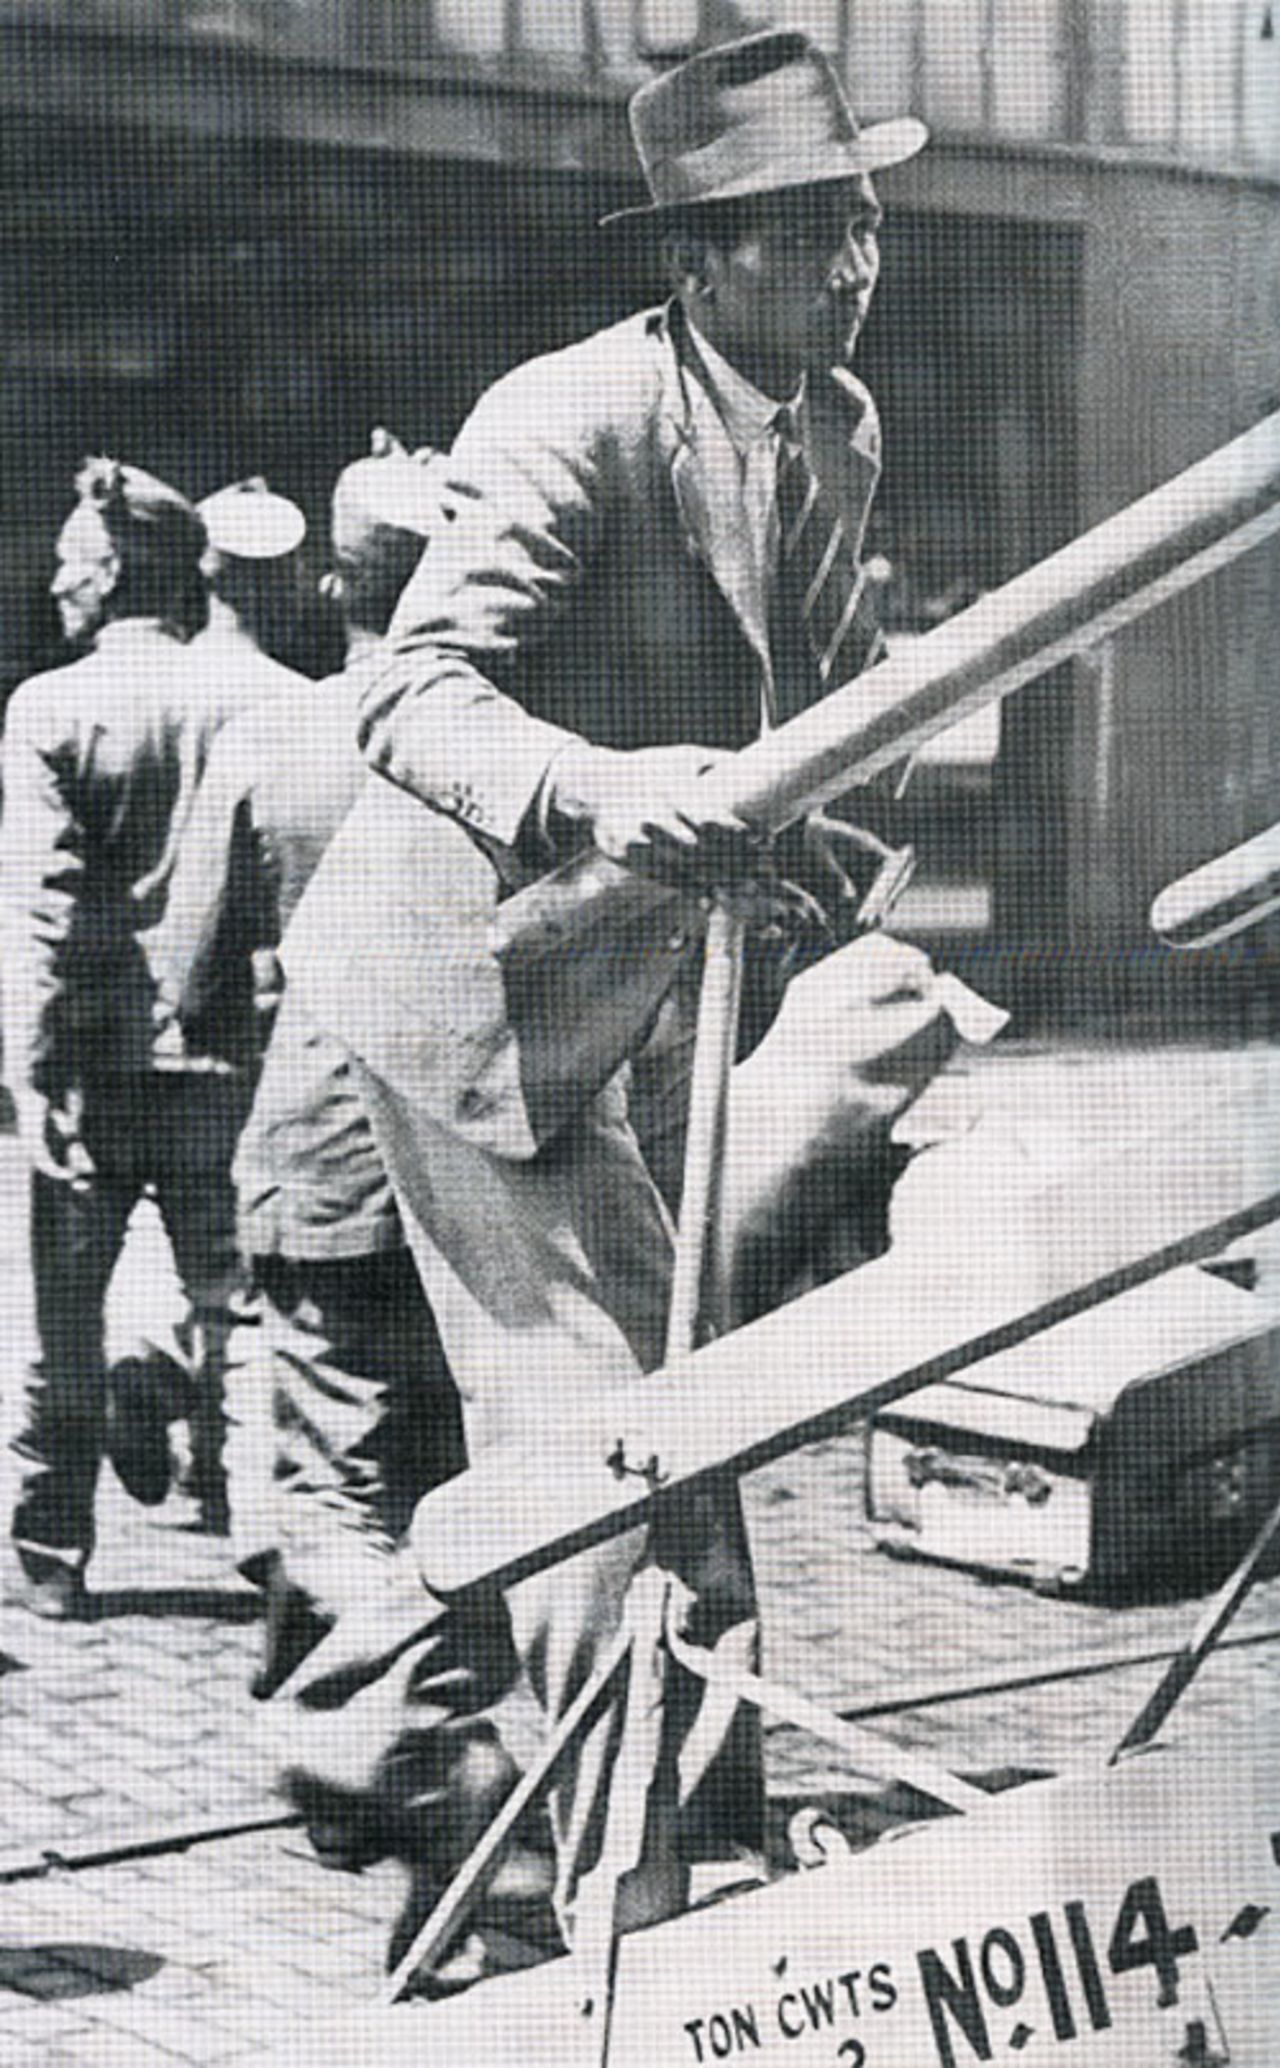 Lala Amarnath boards his ship after being thrown off the 1936 tour, Southampton,  June 28, 1936